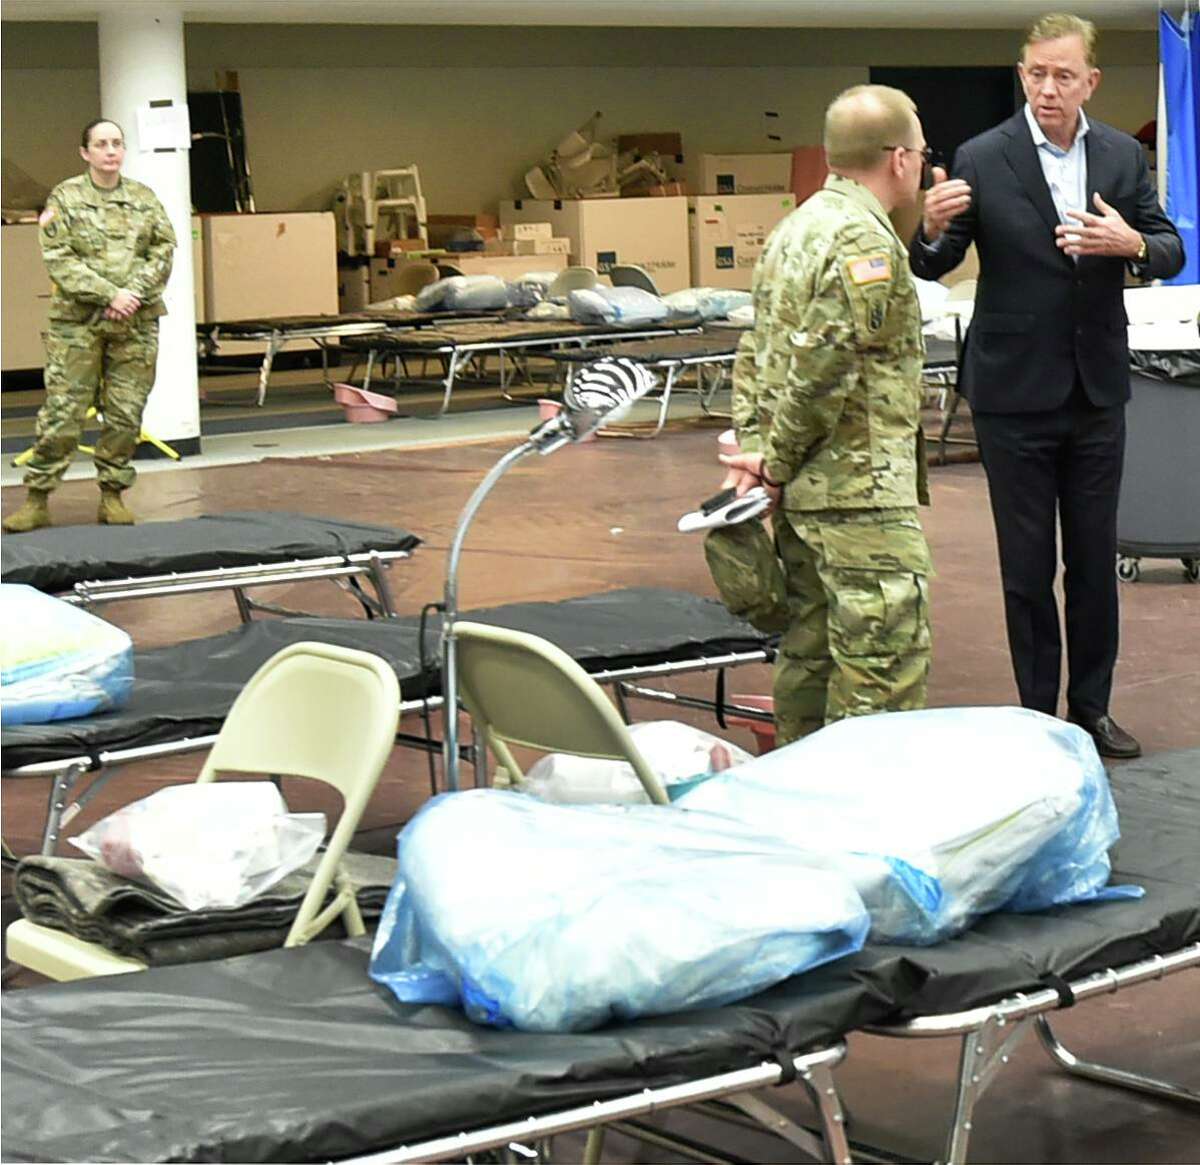 New Haven, Connecticut - Wednesday, April 01, 2020: Connecticut Governor Ned Lamont, right, speaks with U.S. Army Major General Francis Evon, the Connecticut National Guard Adjutant General as he tours a Federal Emergency Management Agency 250-bed medical field hospital Wednesday for non-coronavirus patients staged in the Southern Connecticut State University Moore Field House in New Haven by 75 members of the Connecticut National Guard's 1-102nd Infantry. The site is intended to treat non-COVID-19 patients so there will be more hospital beds people who are impacted by COVID-19 / Coronavirus.